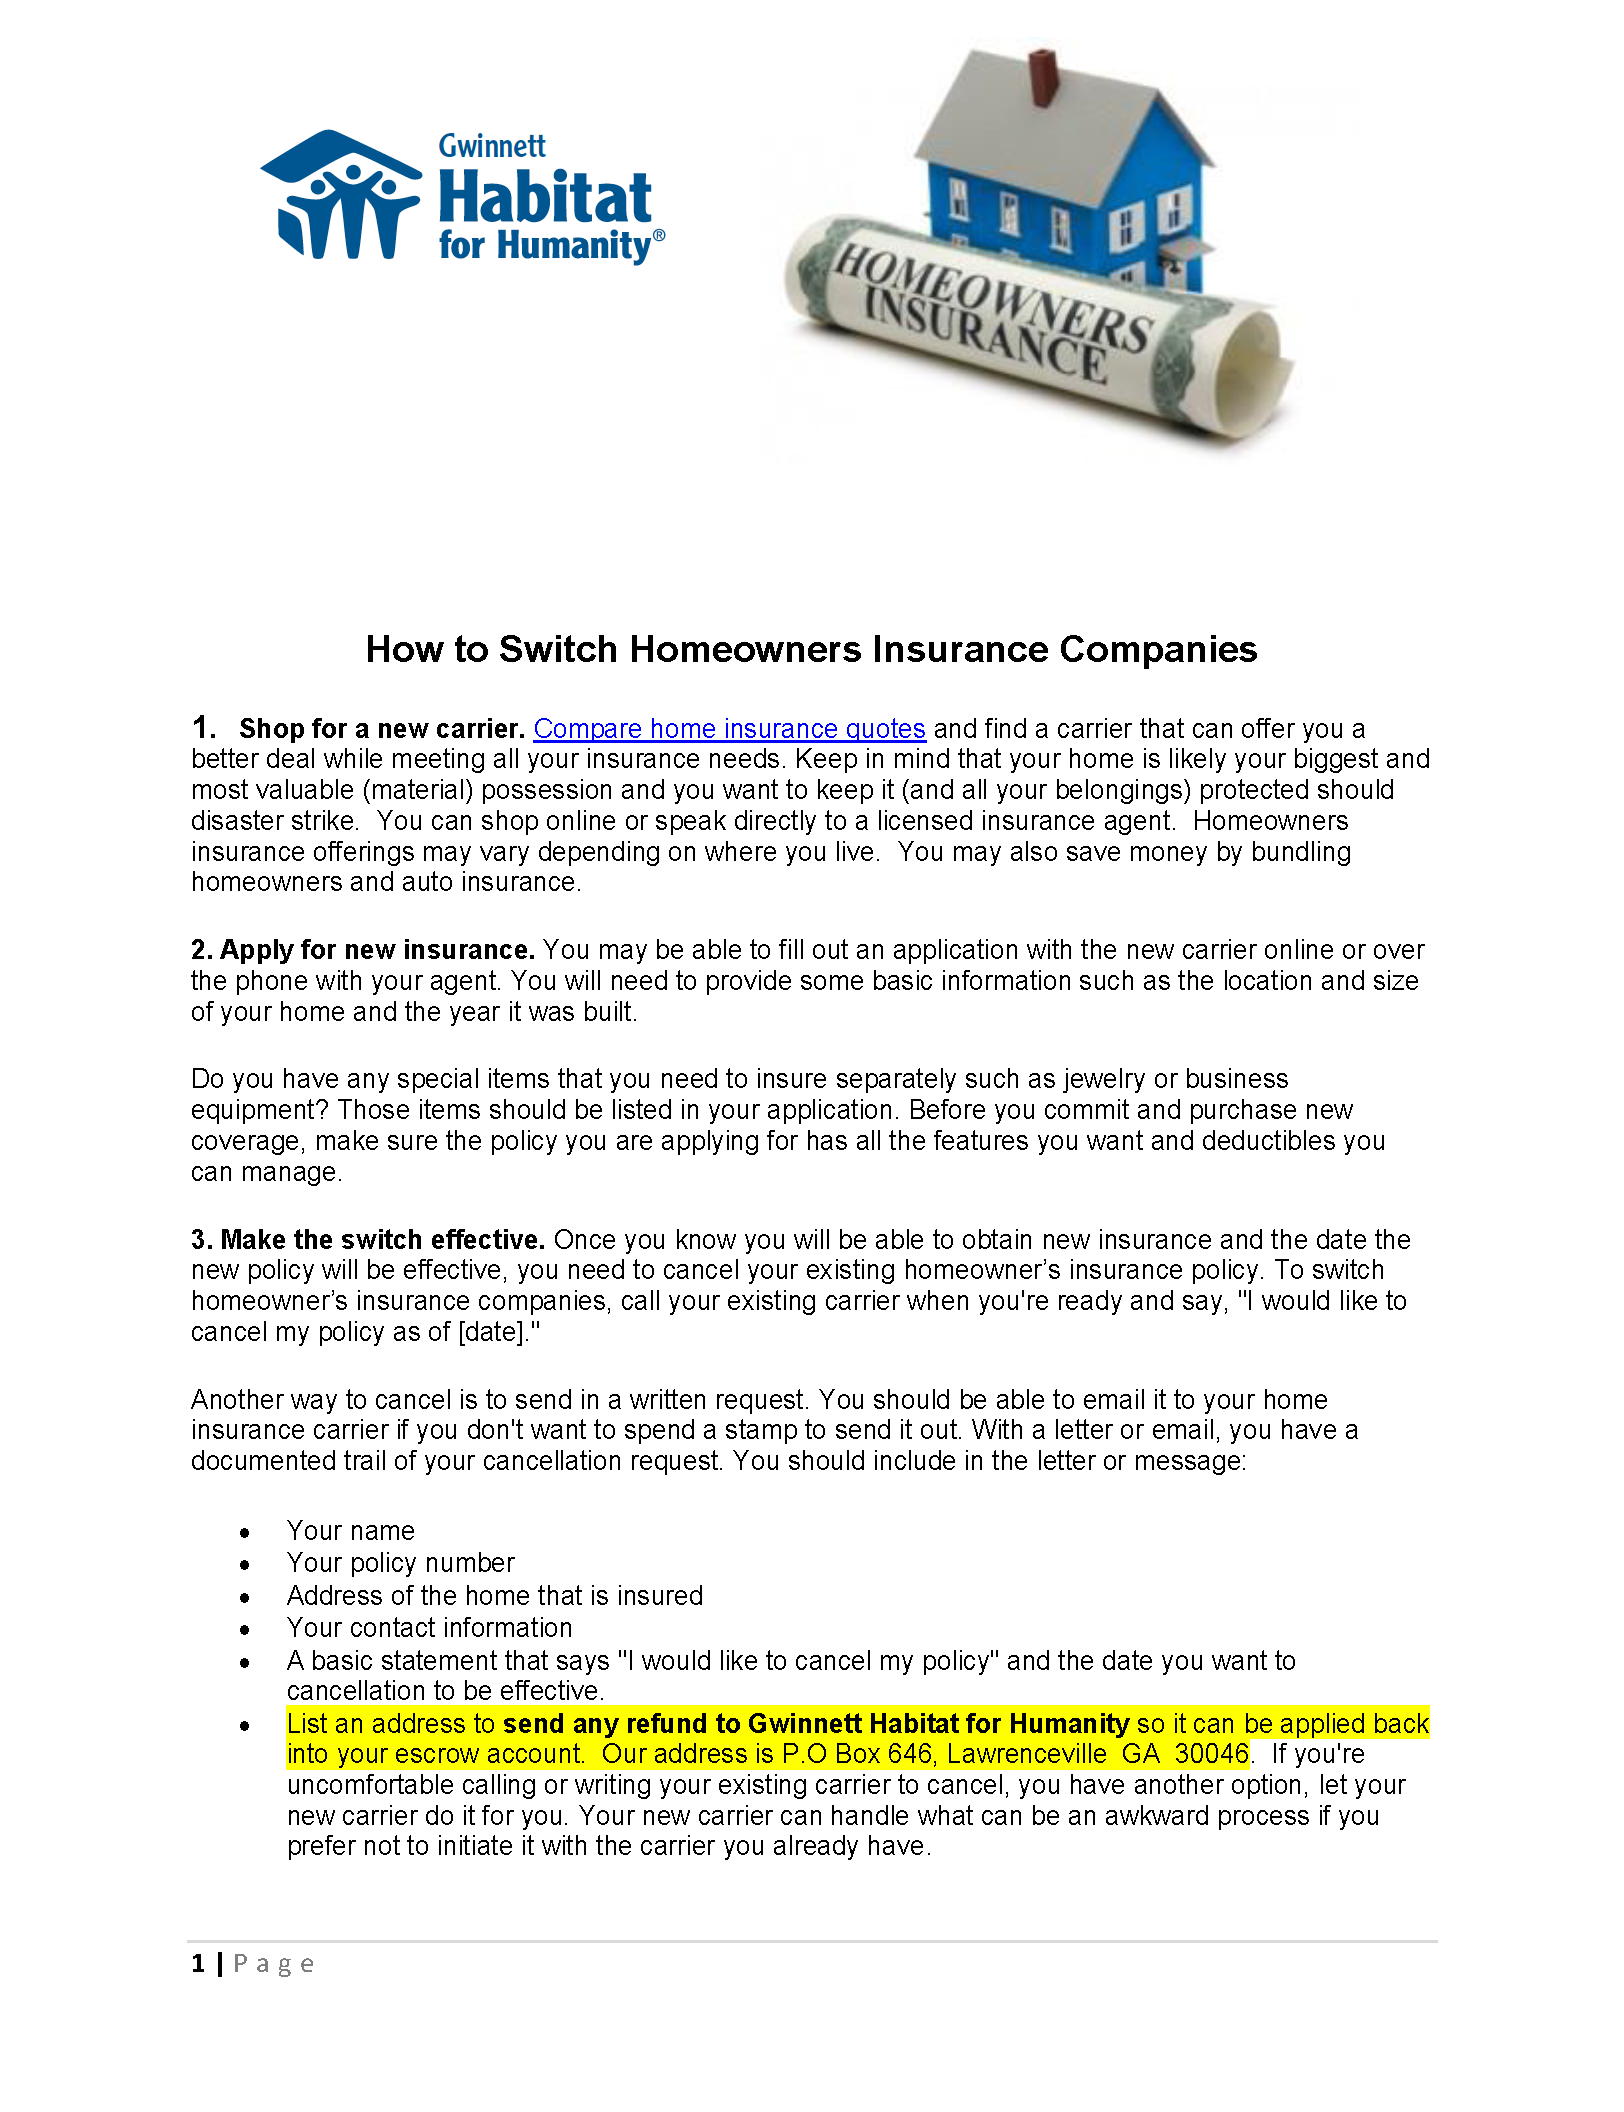 How to switch homeowners insurance companies_Page_1